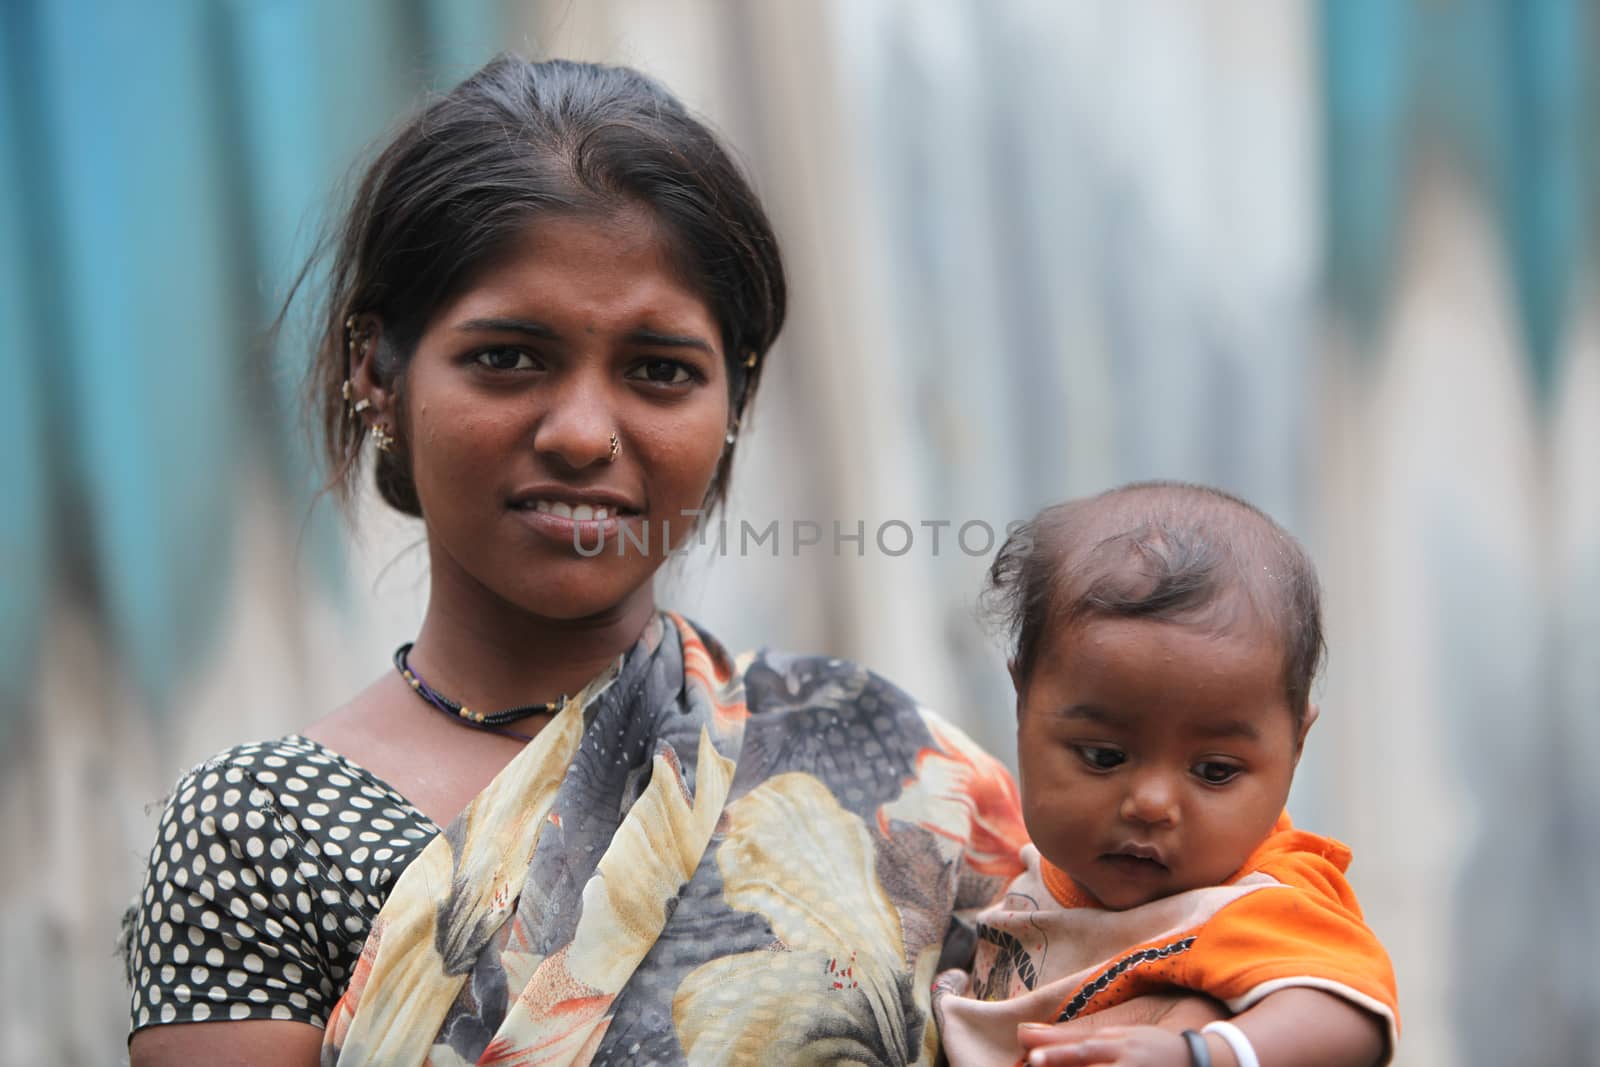 A portrait of a poor Indian lady in her late teens with her baby boy.